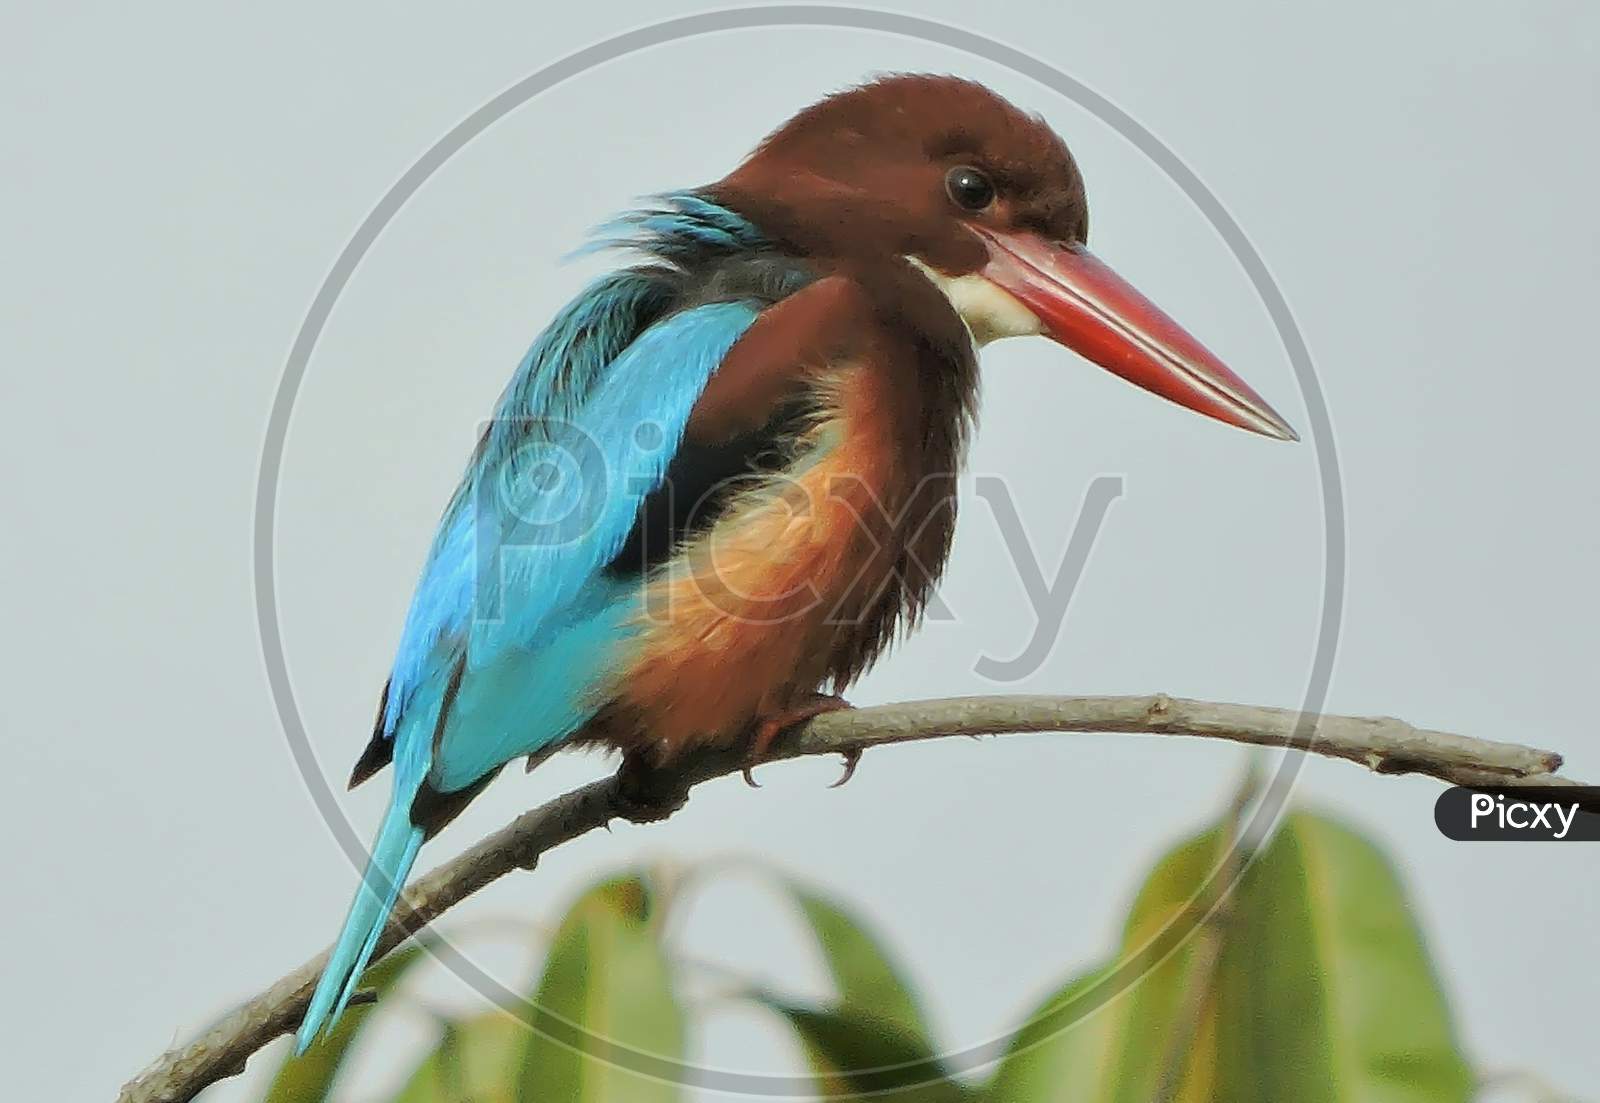 White throated kingfisher or White breasted kingfisher